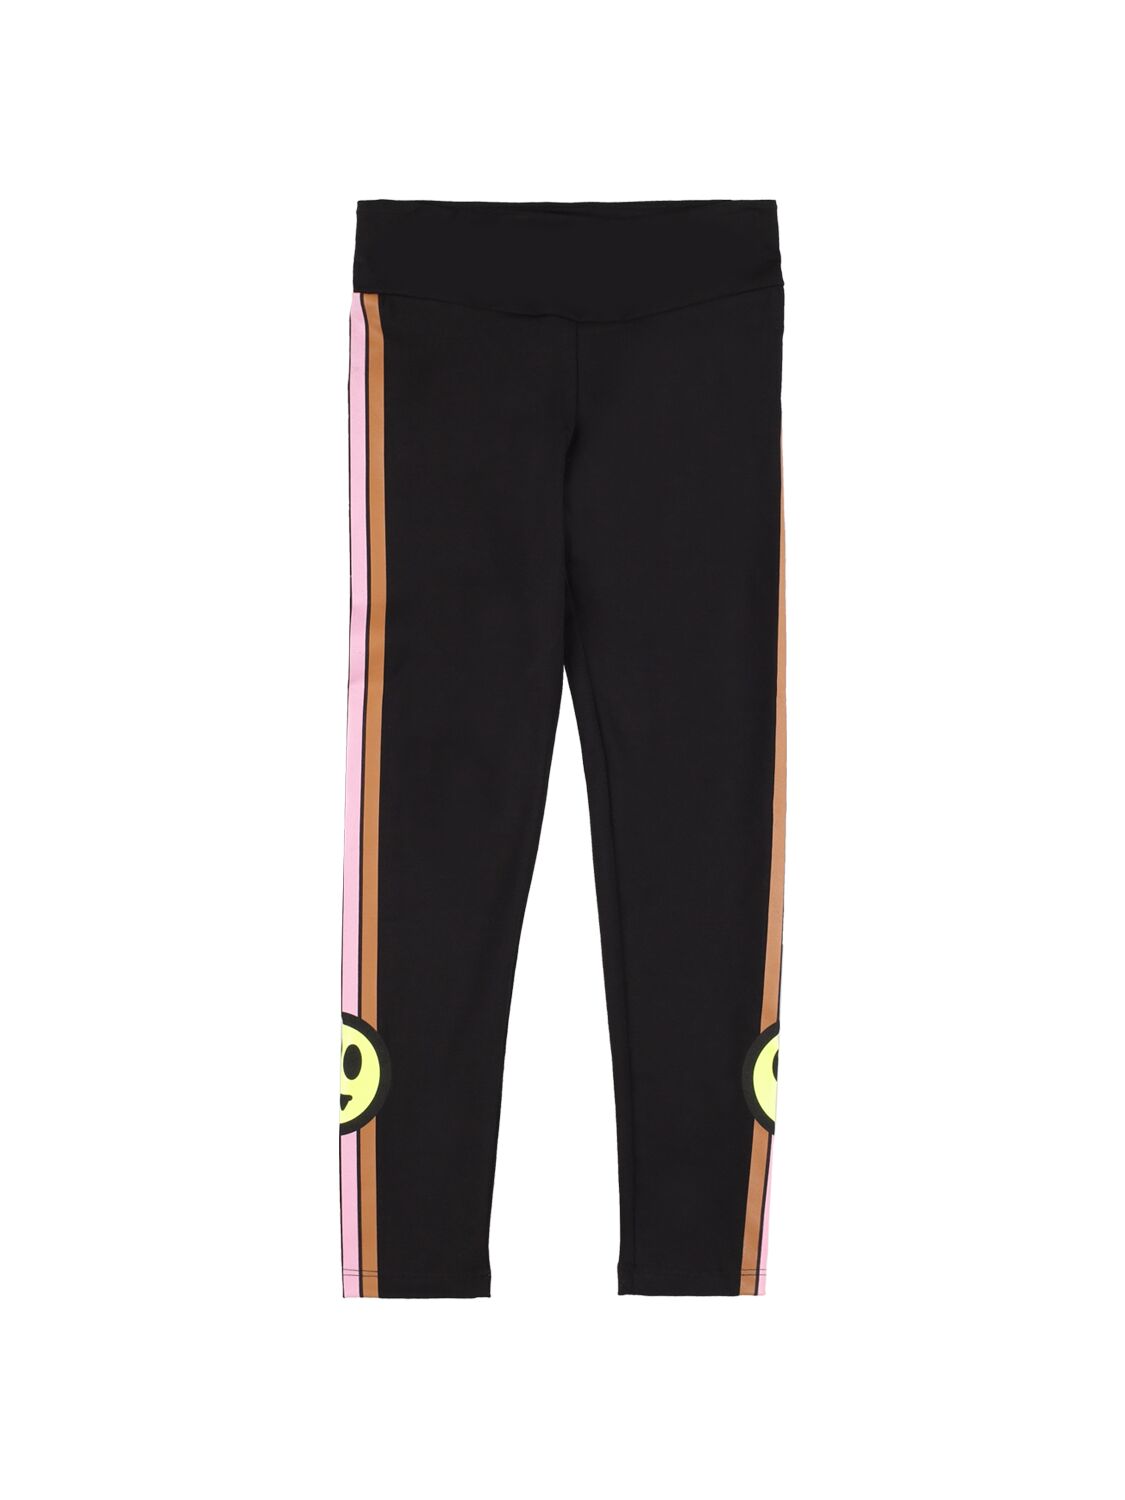 Image of Cotton Jersey Leggings W/ Bands